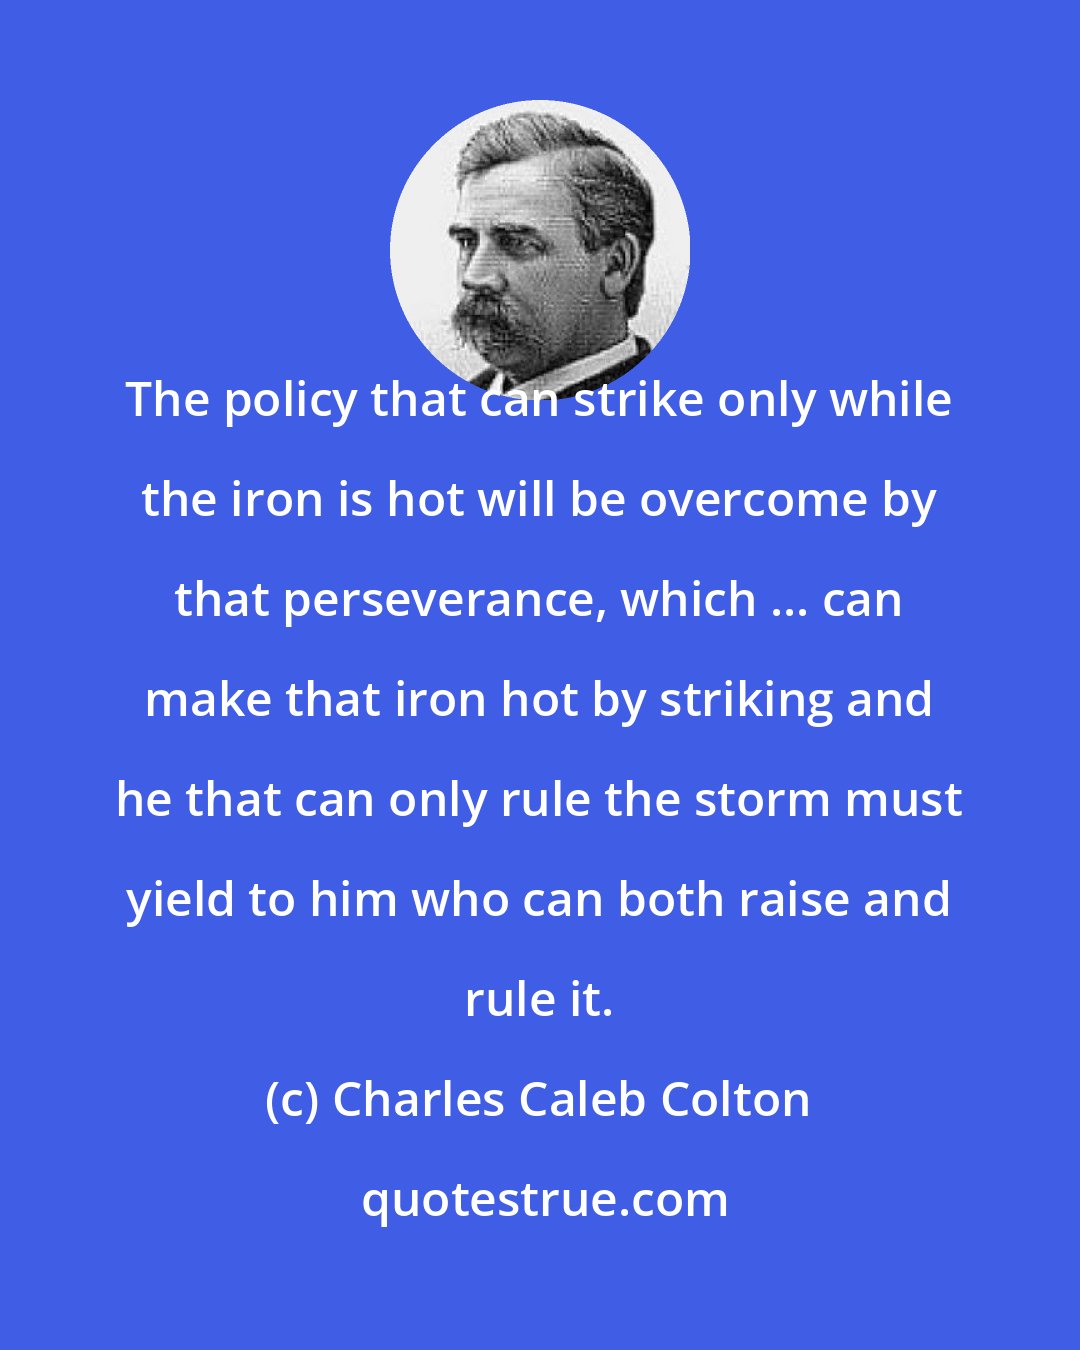 Charles Caleb Colton: The policy that can strike only while the iron is hot will be overcome by that perseverance, which ... can make that iron hot by striking and he that can only rule the storm must yield to him who can both raise and rule it.